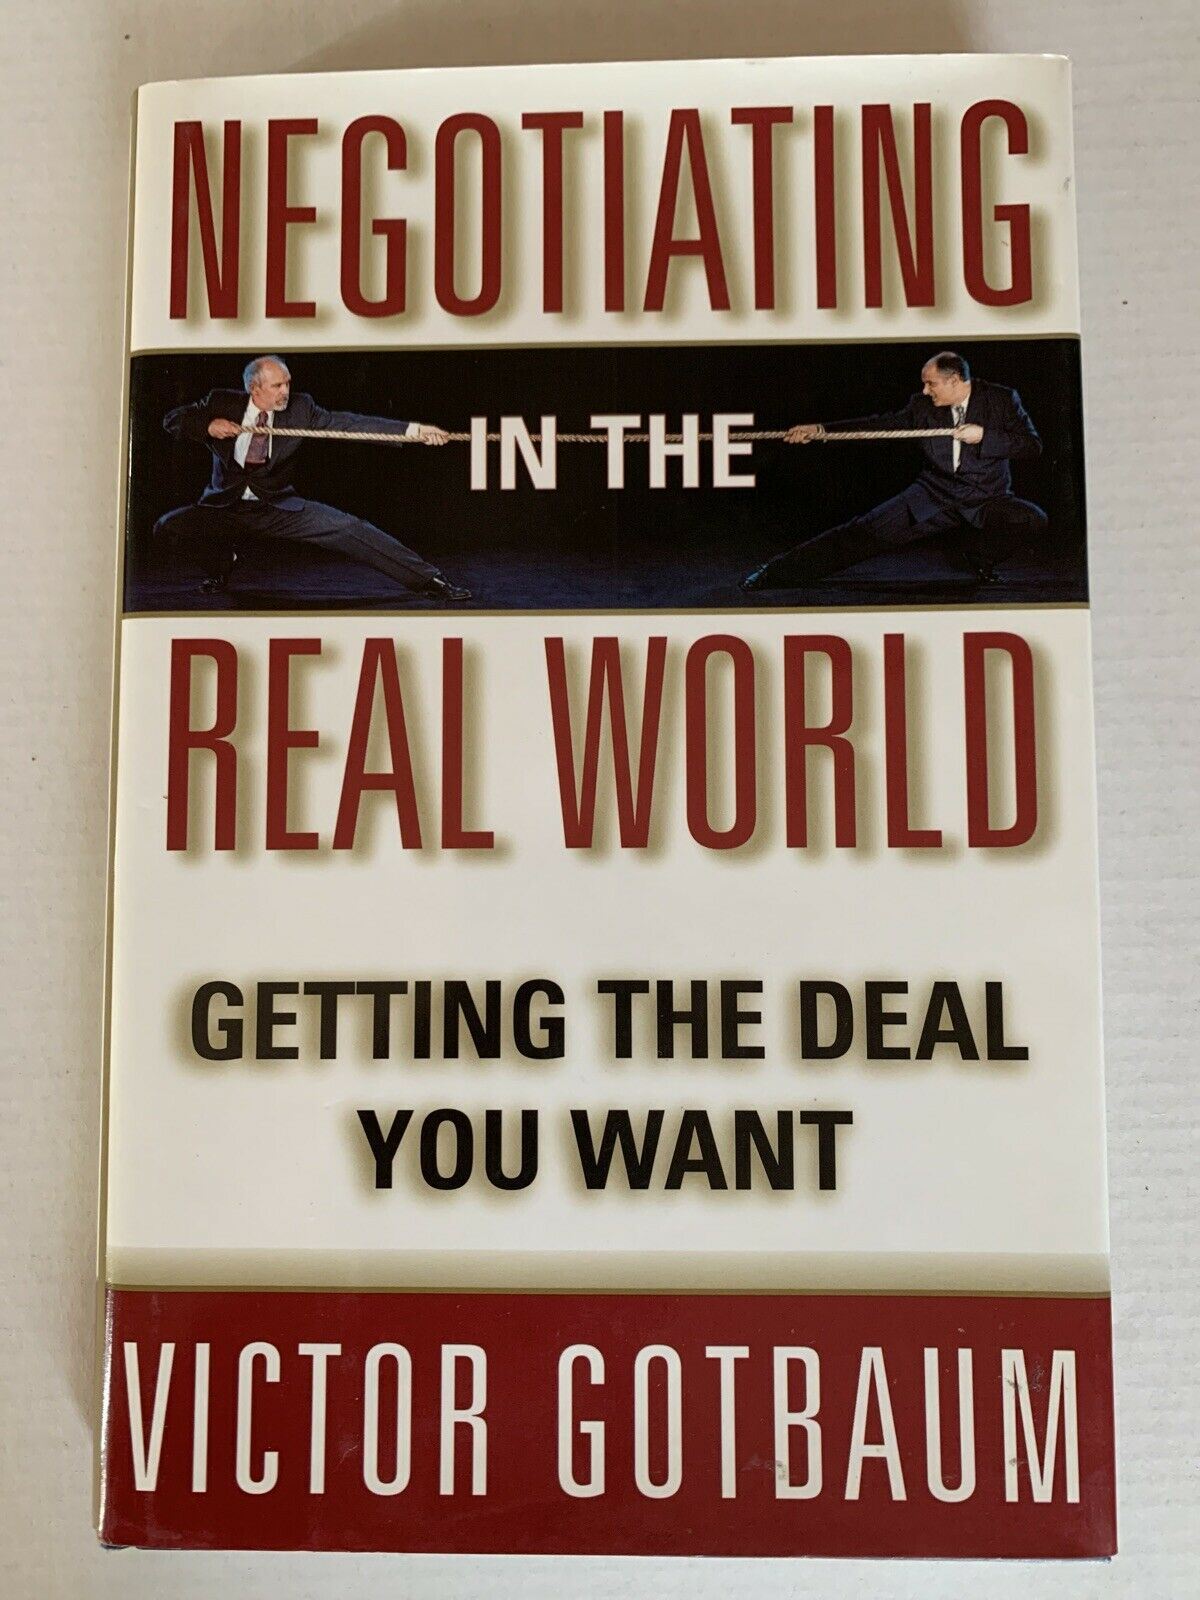 Negotiating in the Real World by Victor Gotbaum (Hardcover, 1999)